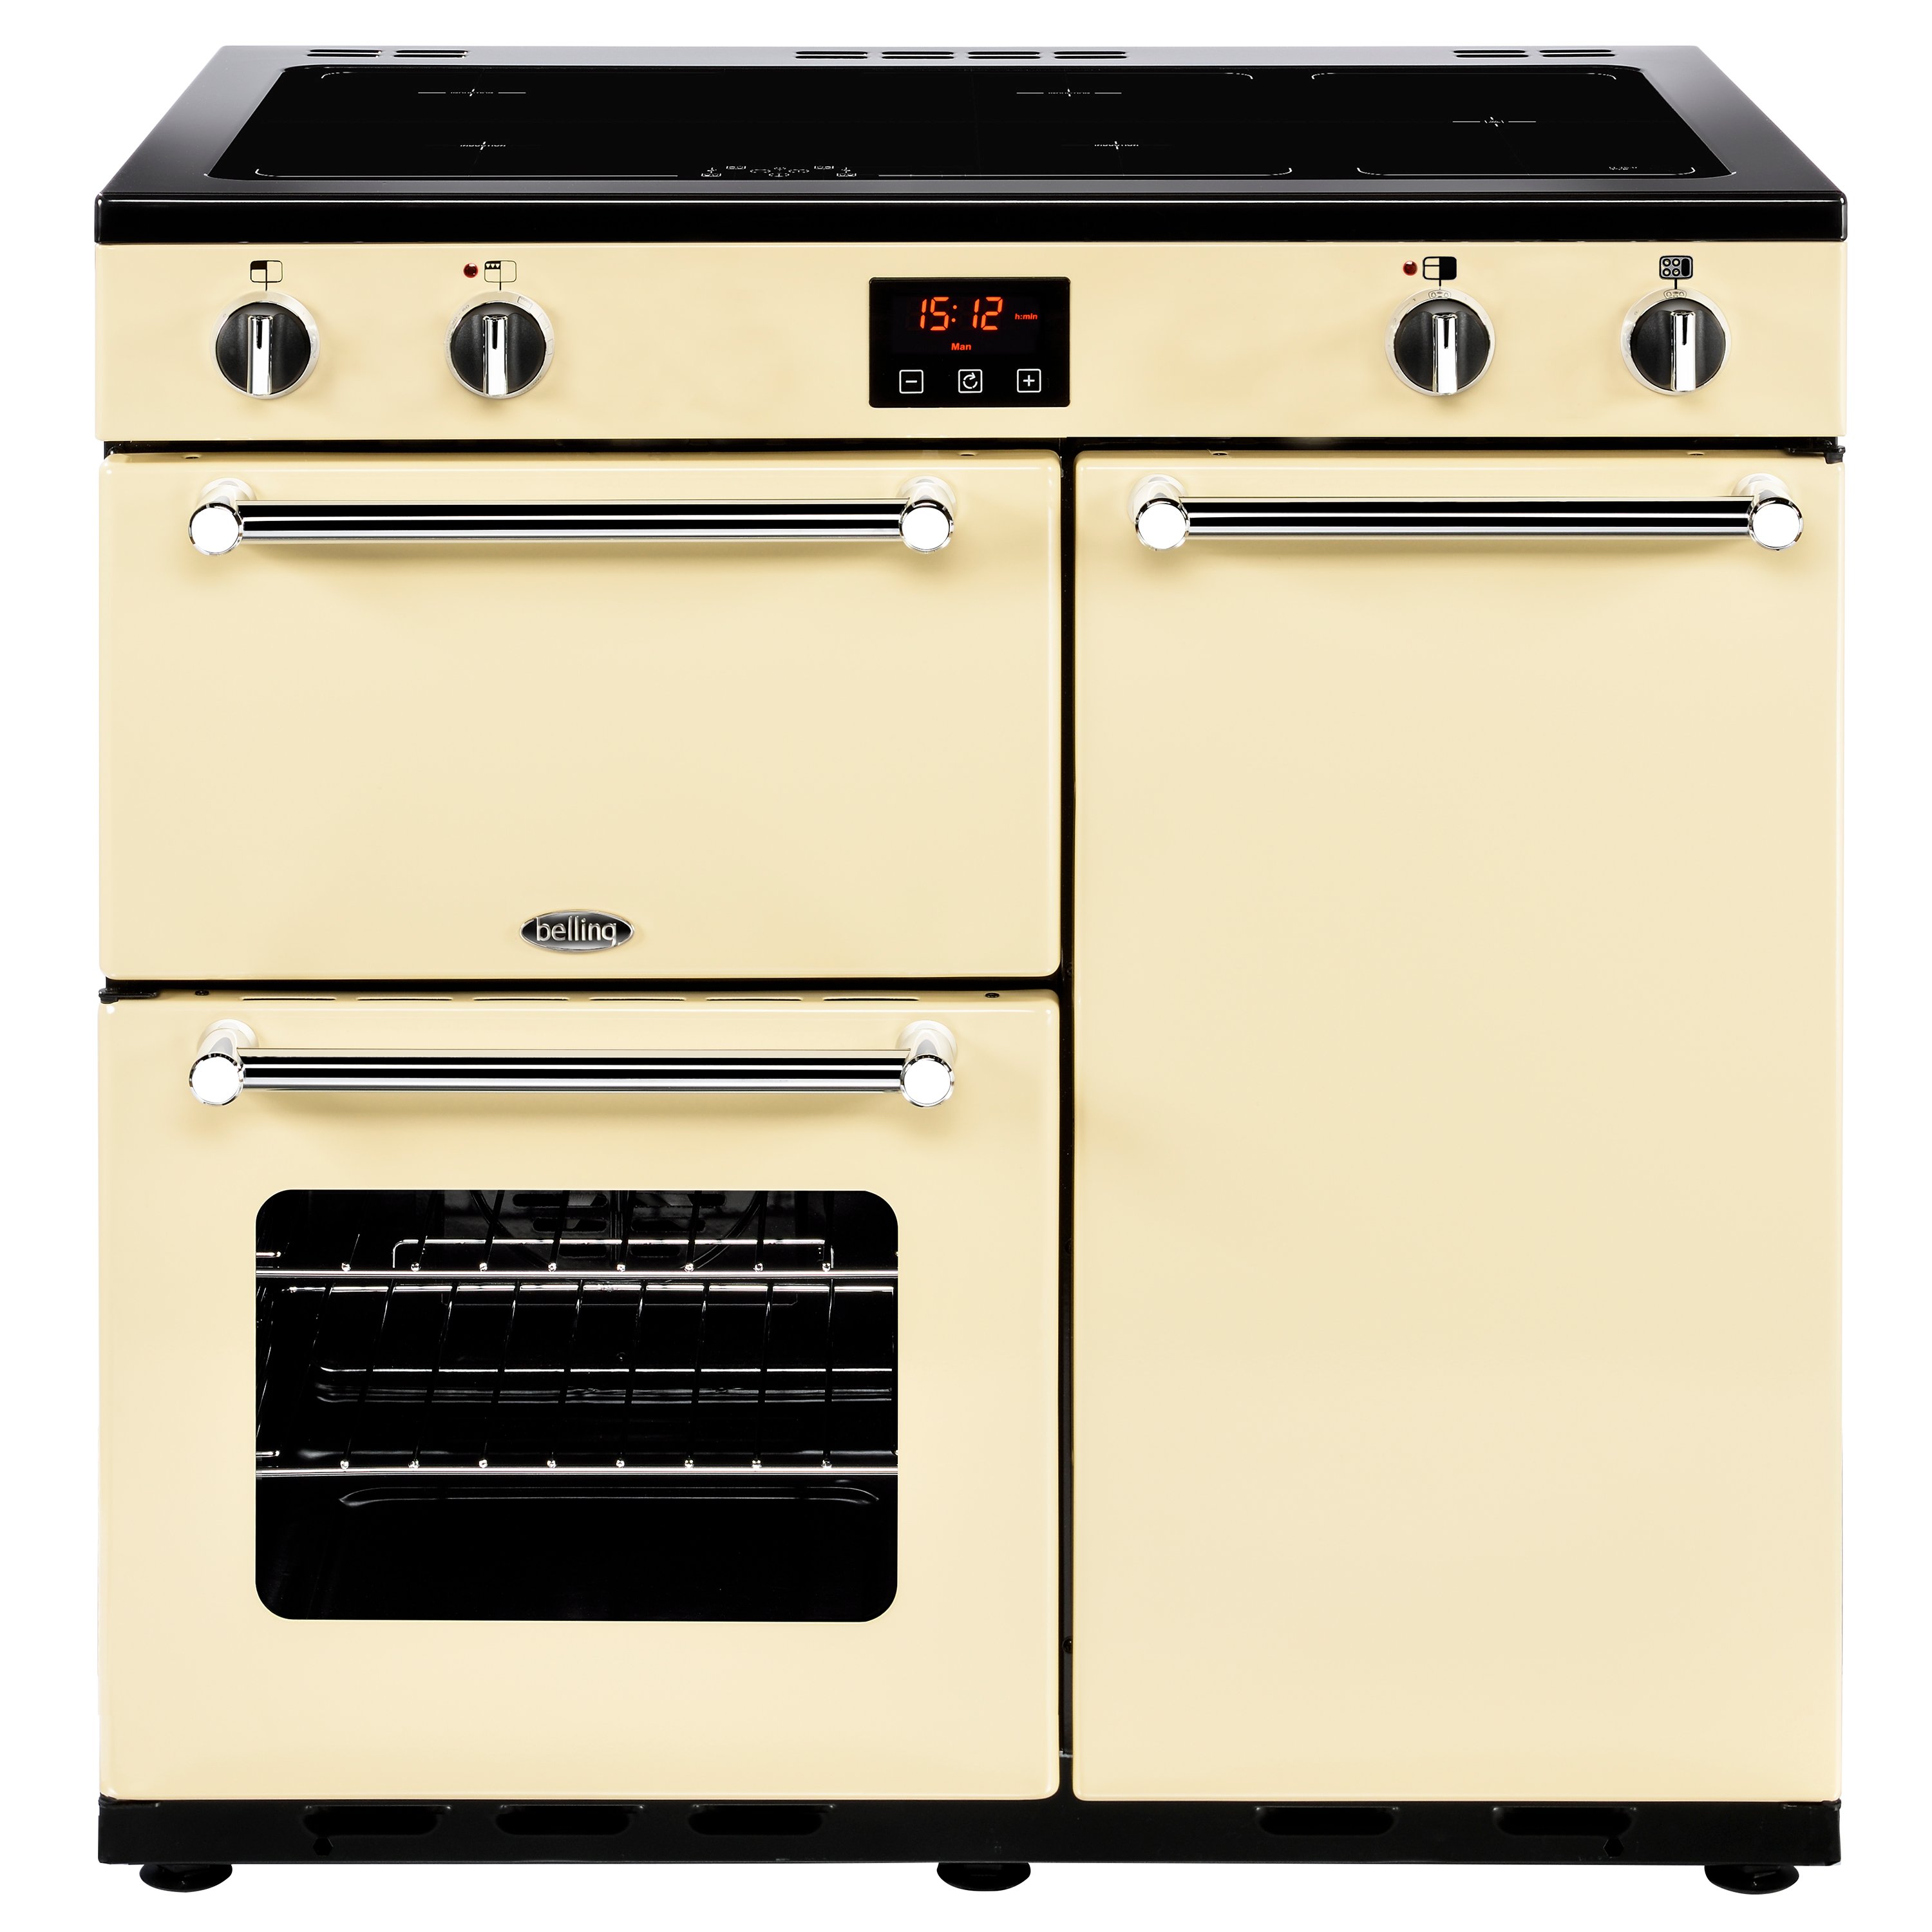 90cm electric range cooker with 4 zone induction hob, additional warming zone, conventional oven and grill, fanned main oven and tall fanned oven. Requires 32A connection.